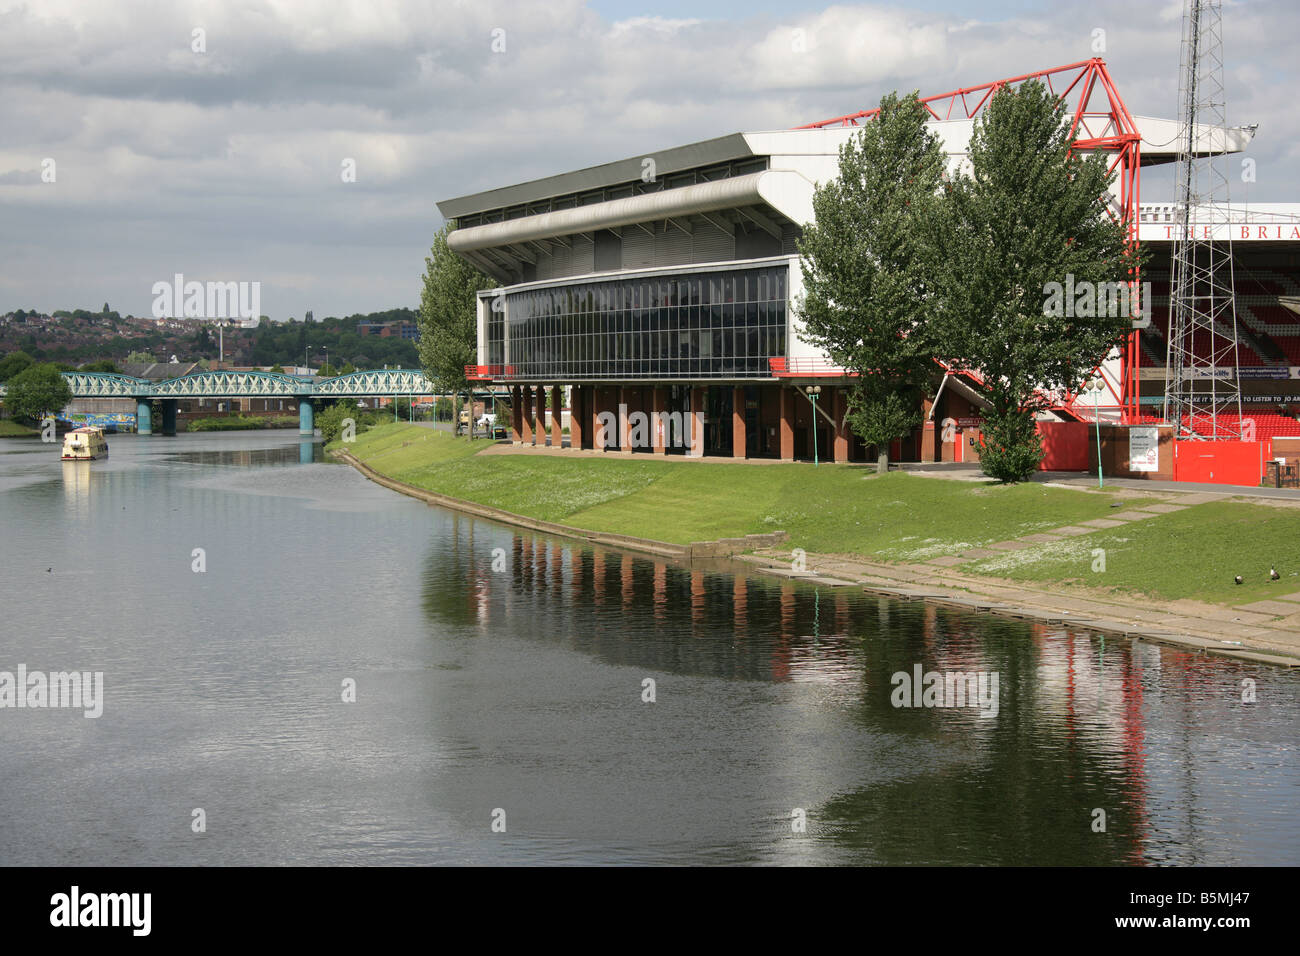 City of Nottingham, England. The Nottingham Forest Football Club NFFC stadium at Meadow Lane, by the banks of the River Trent. Stock Photo